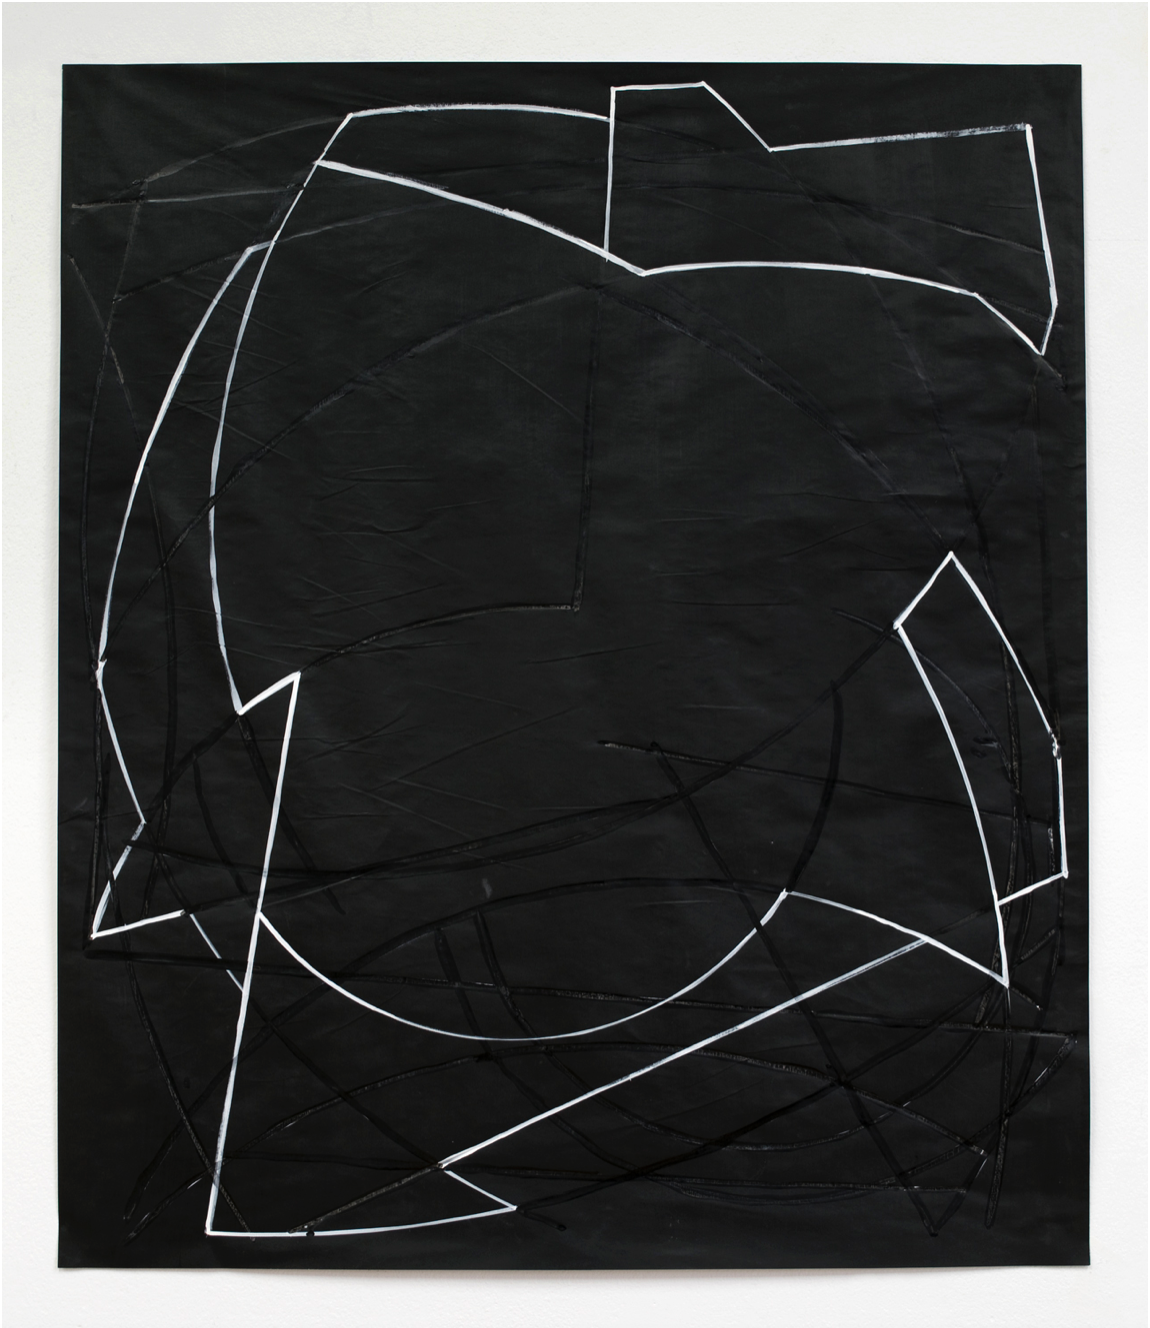  Jen Aitken  Untitled Drawing # 69 , 2018 ink and gesso on vellum 34 x 29 in (86.4 x 73.7 cm) 